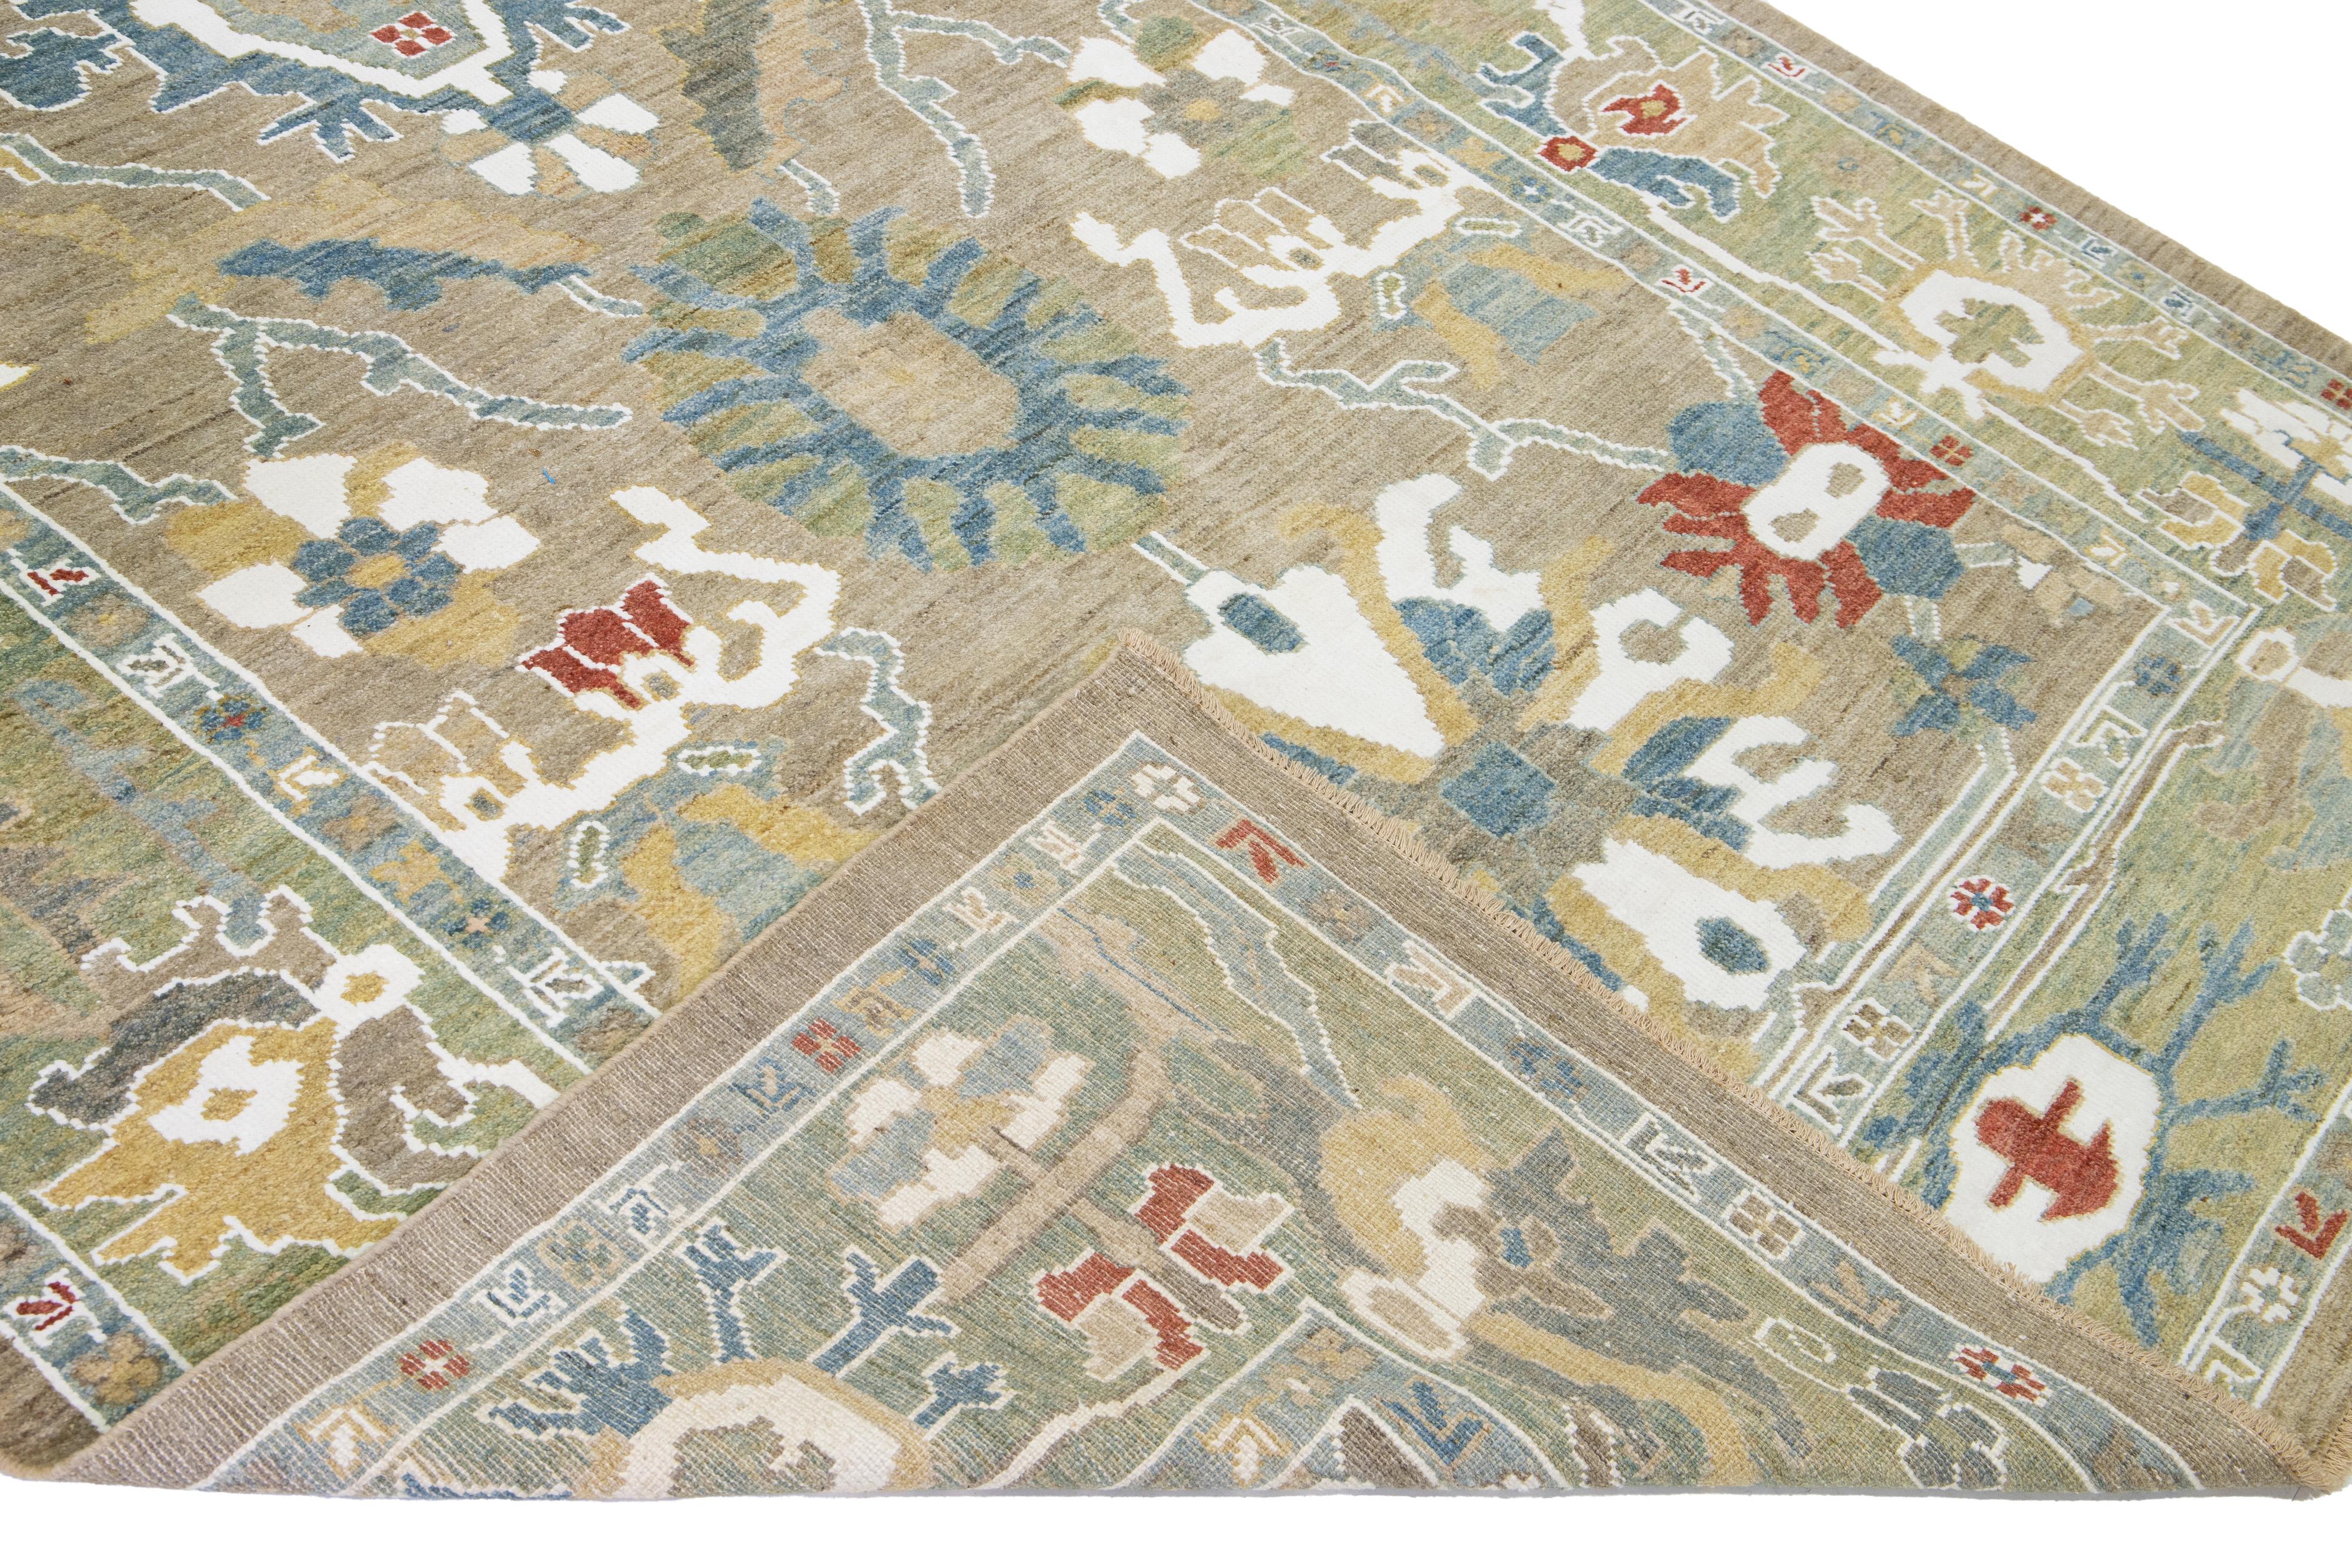 Modern Mahal hand-knotted wool runner with a brown field. This piece has a green frame and multicolor accent colors that features a gorgeous all-over floral design.

This rug measures: 6'9